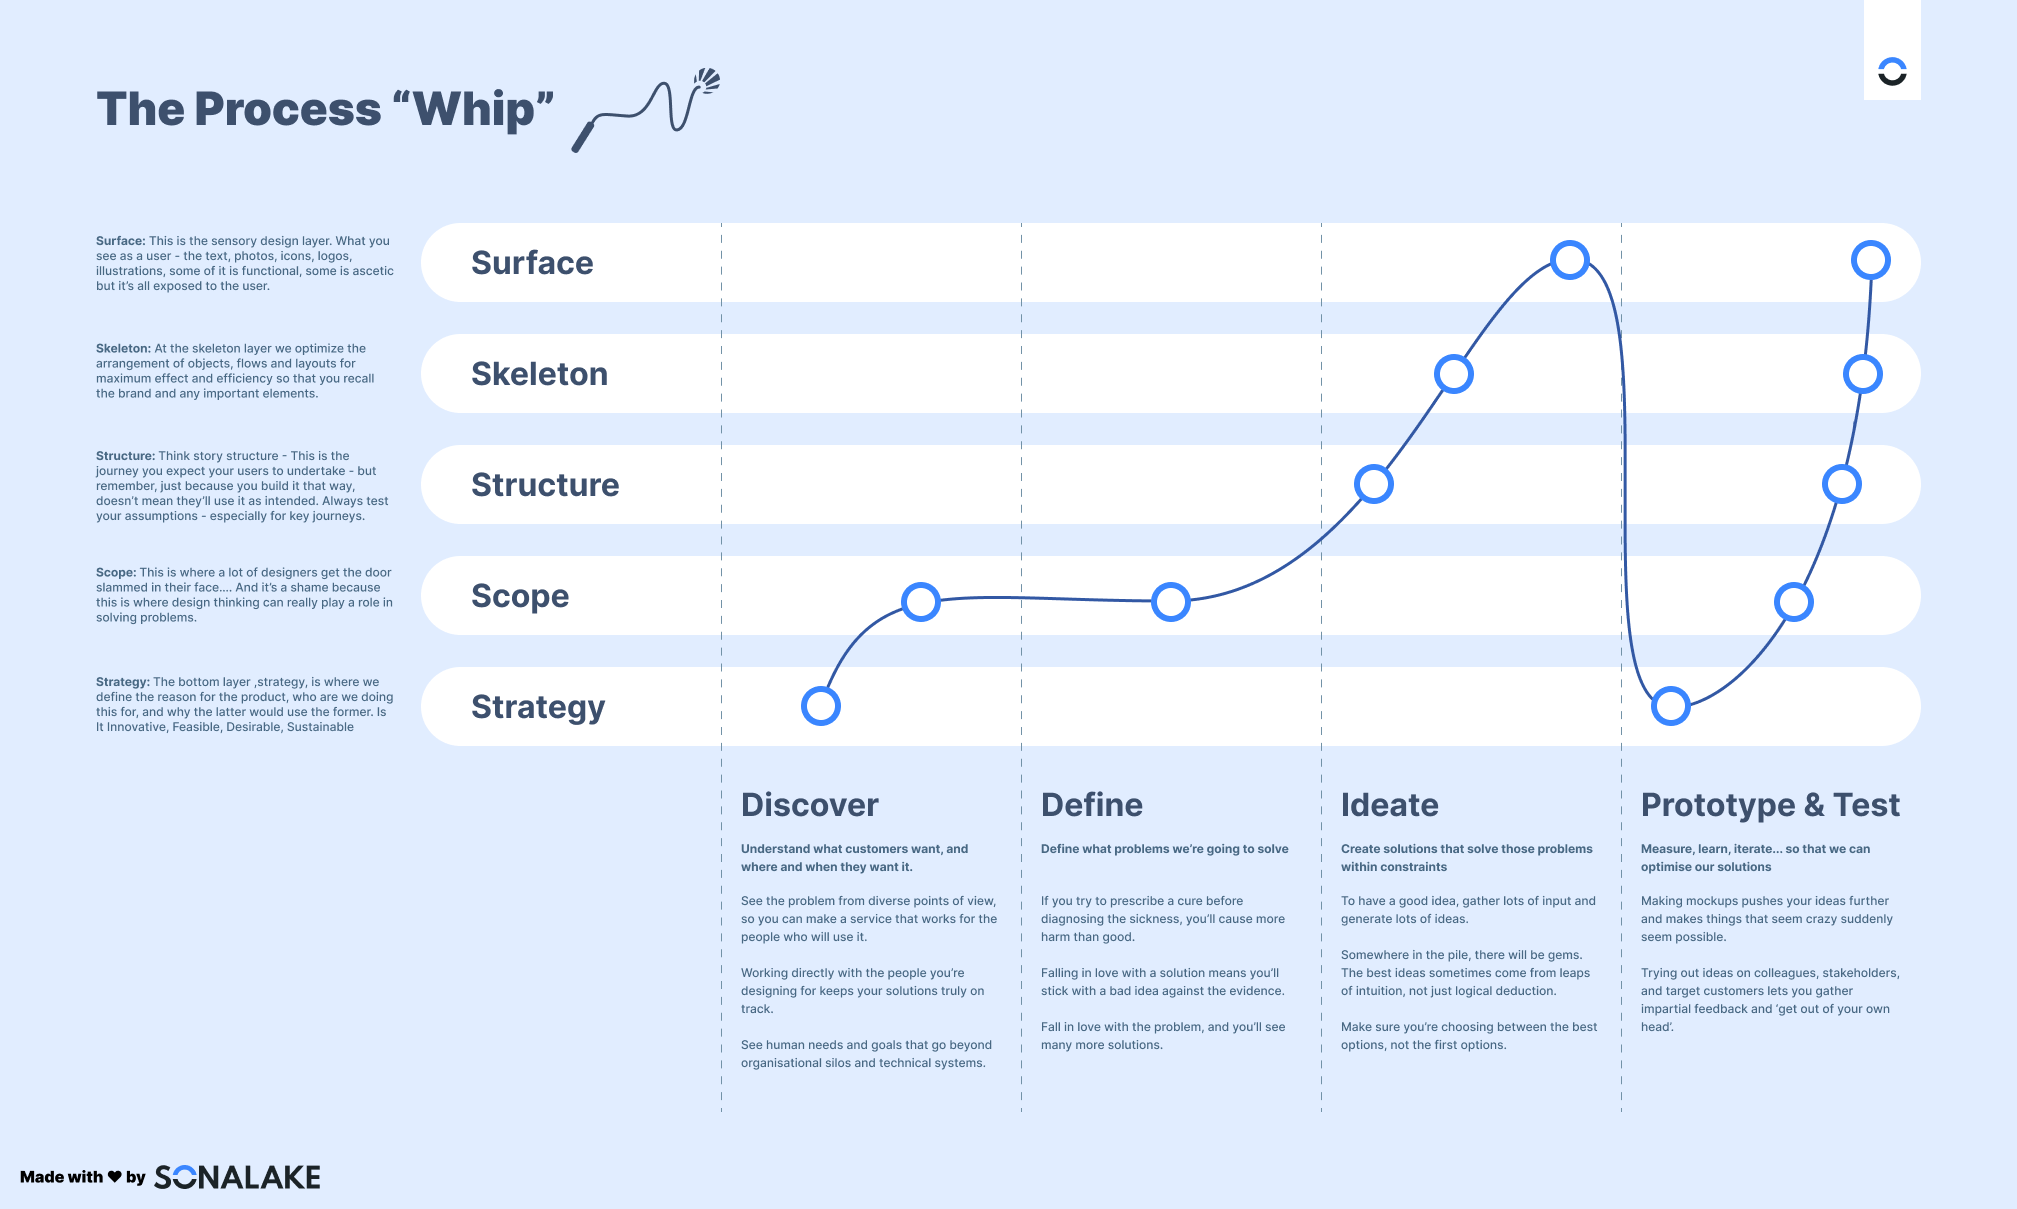 The Process "Whip" explained